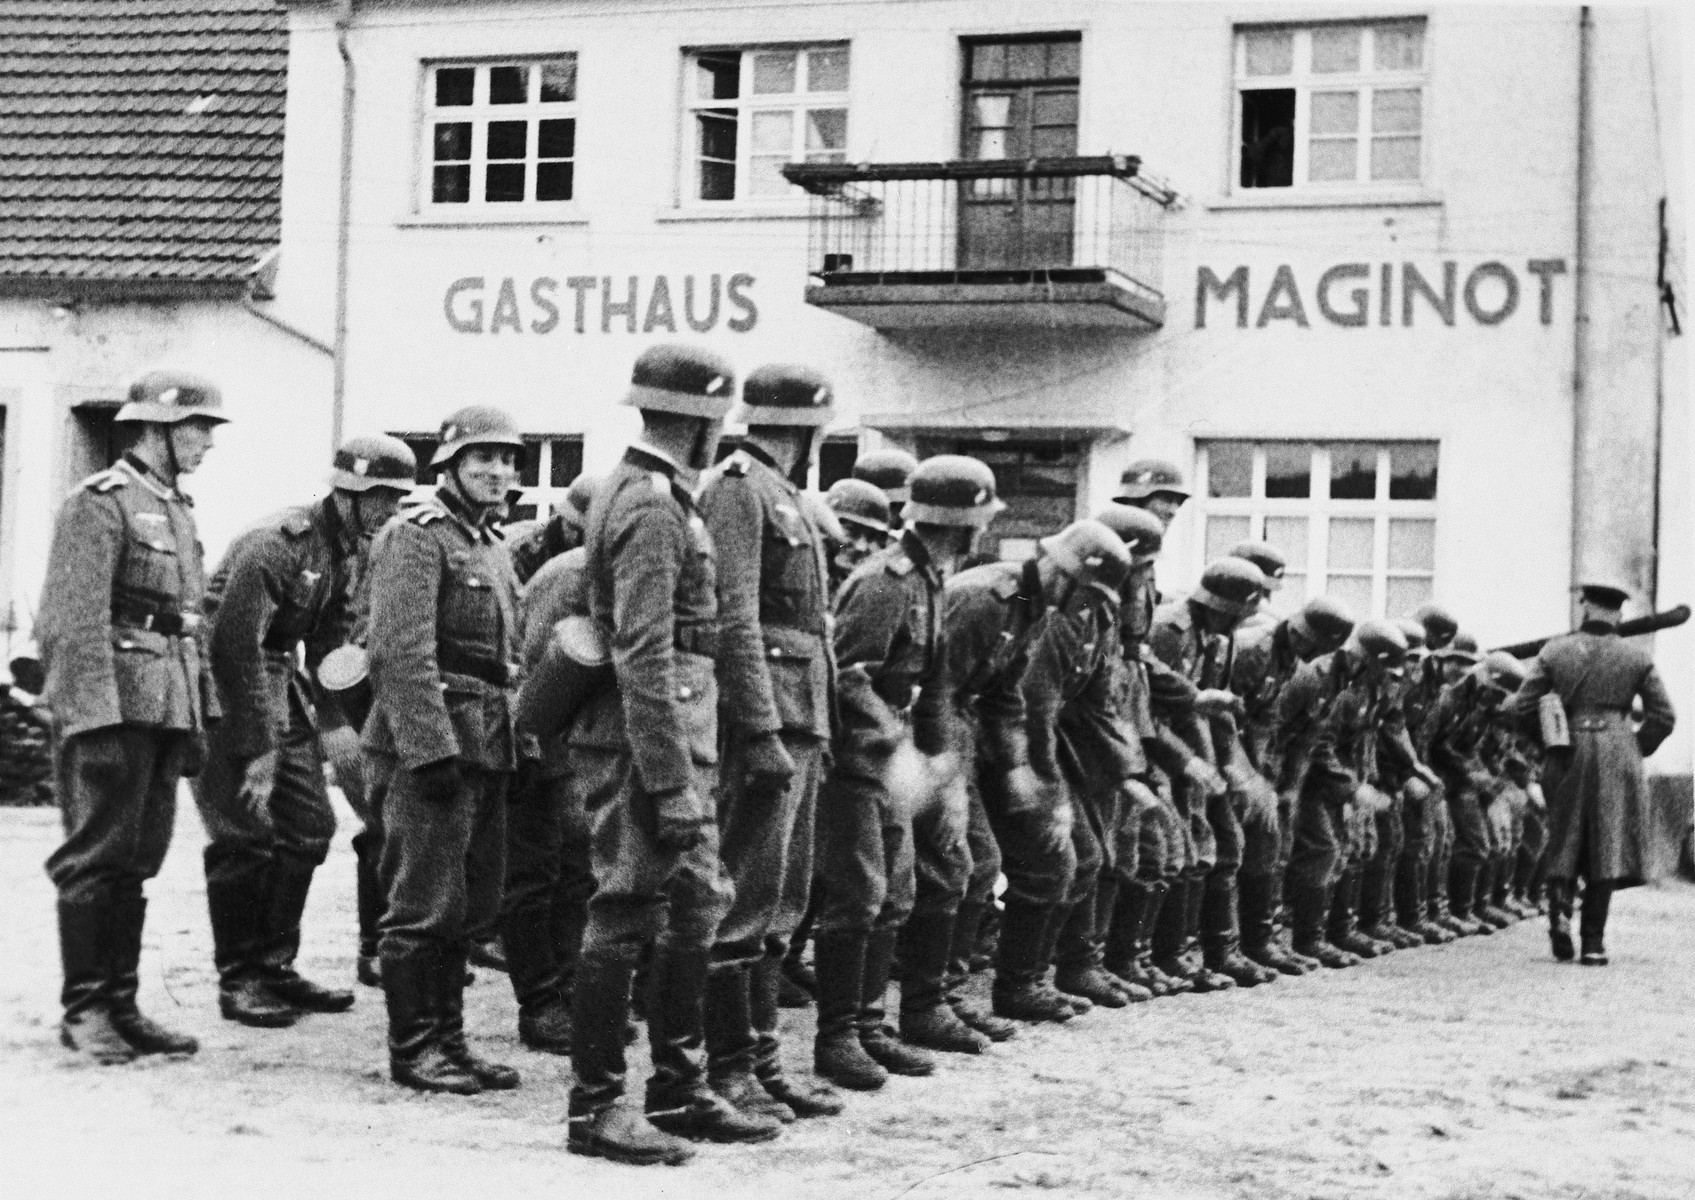 A German officer inspects his troops in front of the Gasthaus Maginot in Eppenbrunn, Germany.